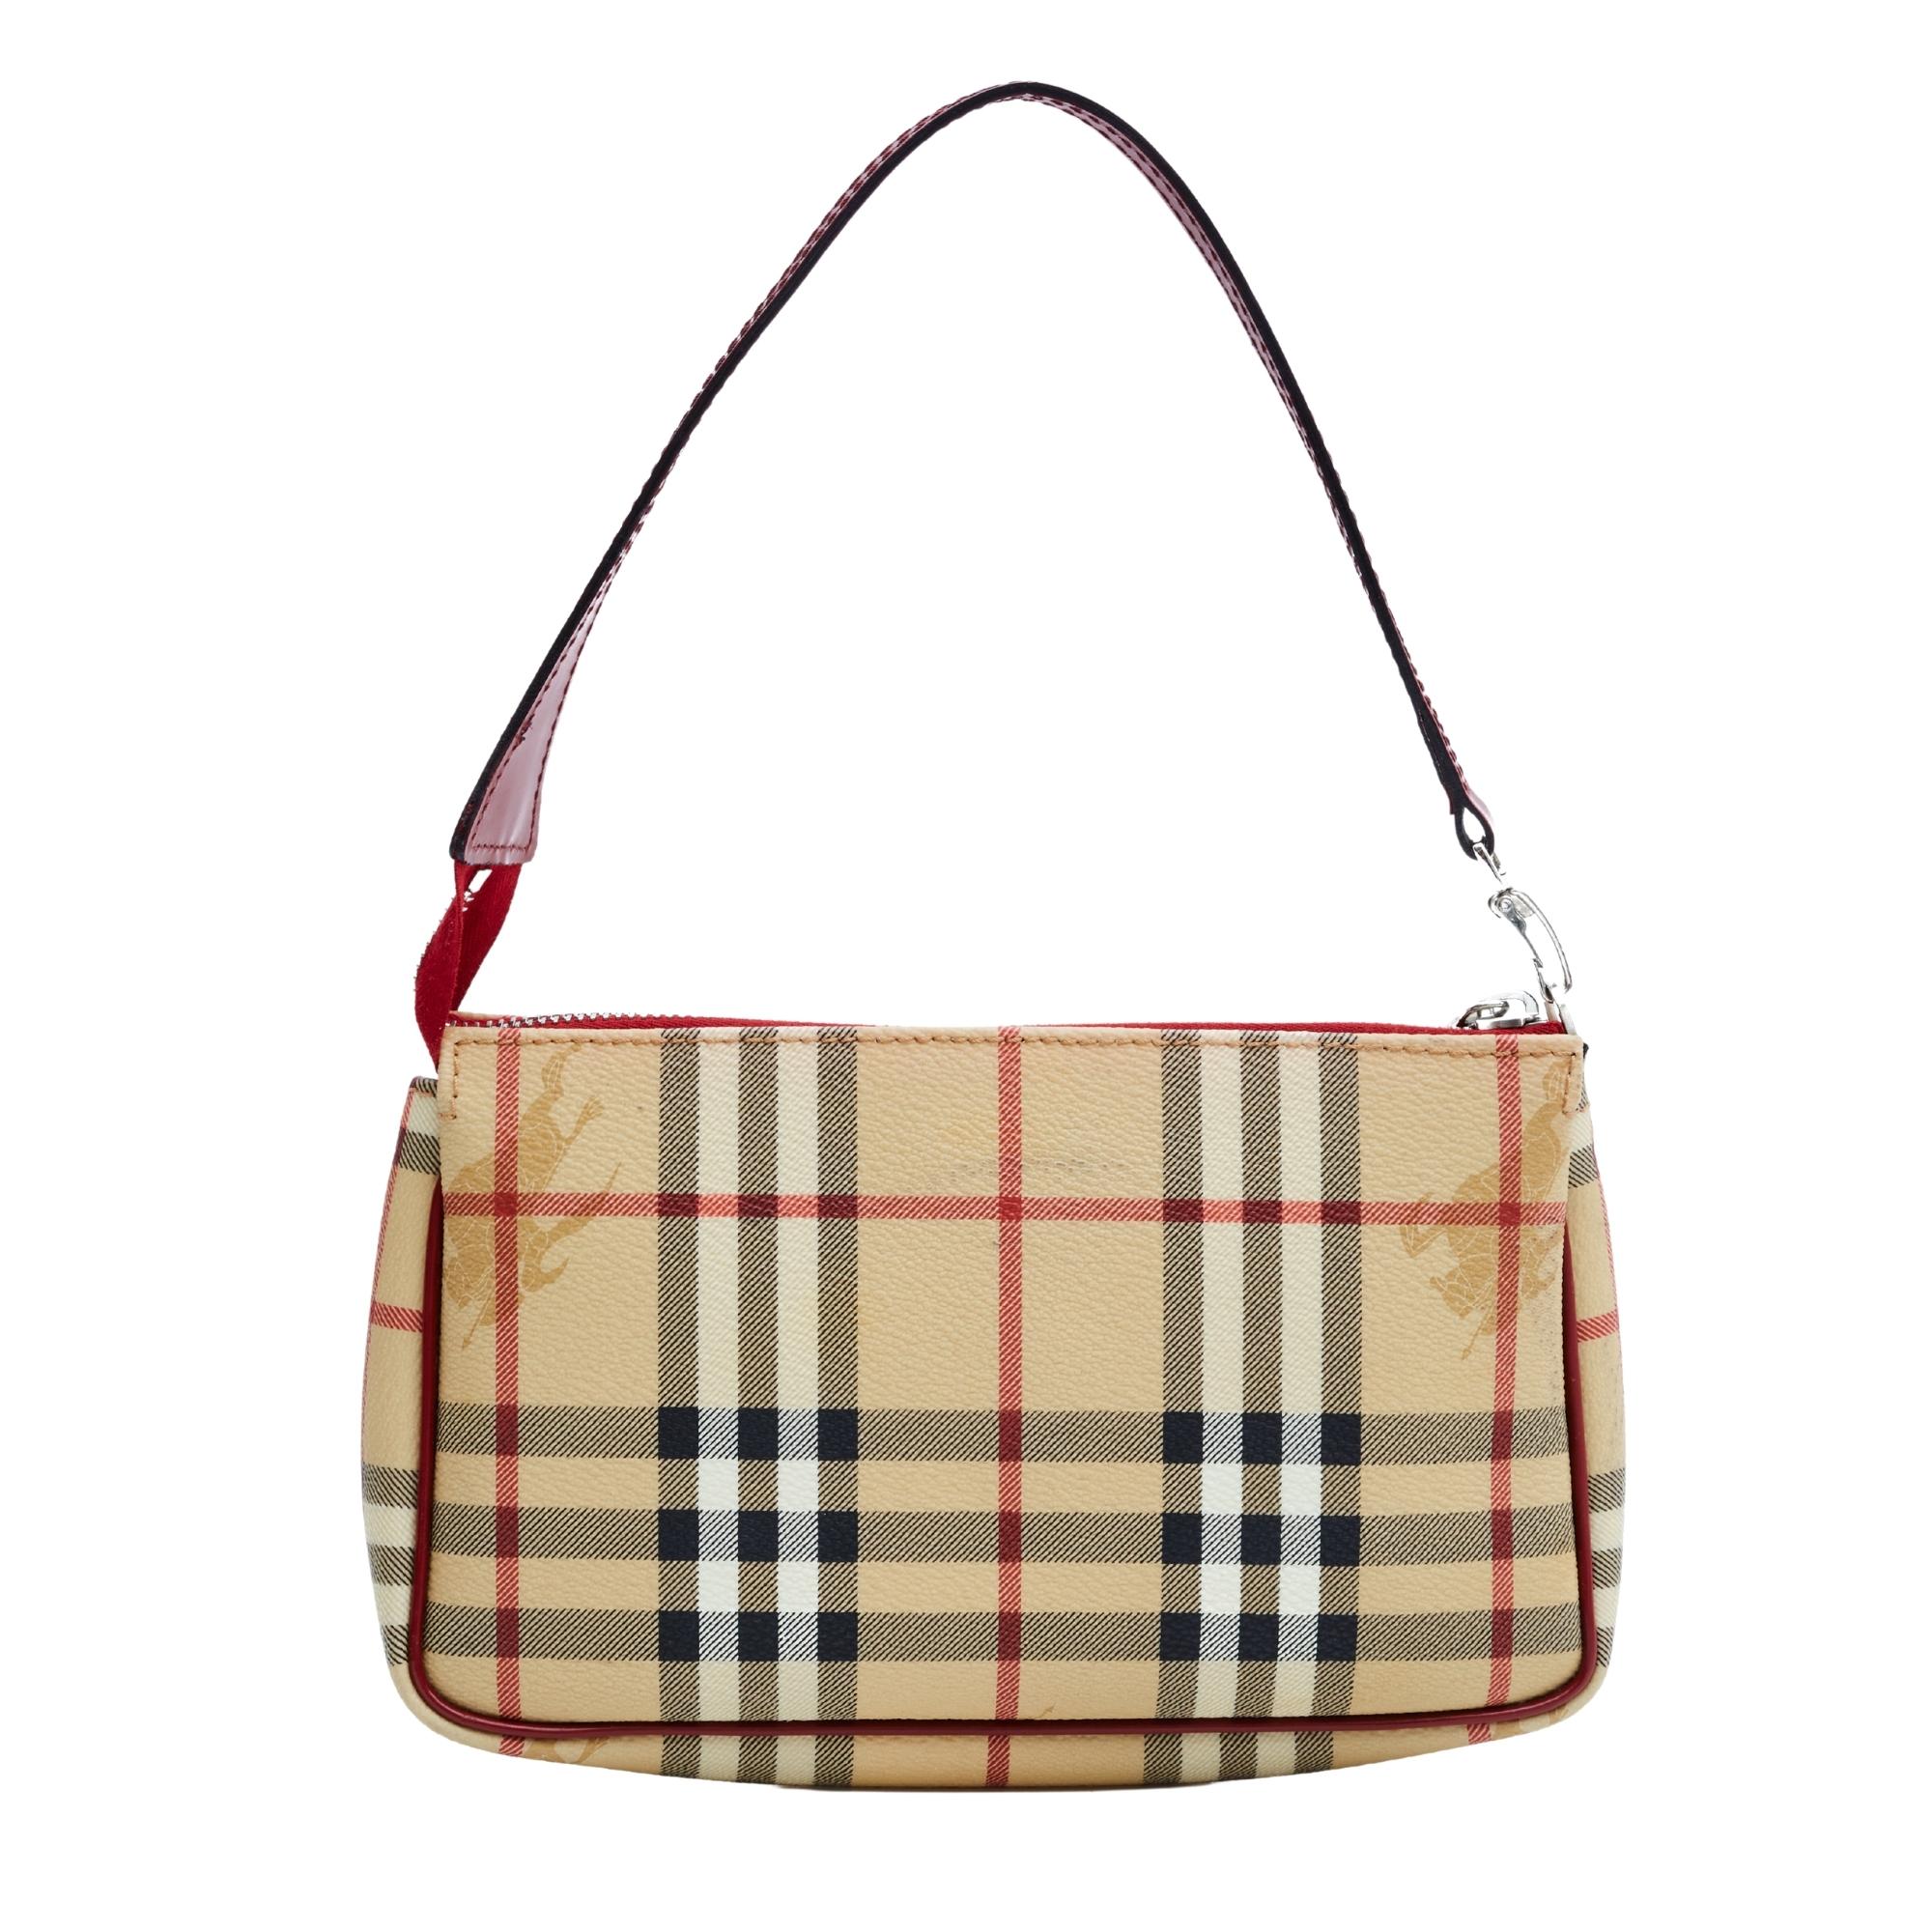 This mini bag is made with beige coated canvas with Burberry's signature nova check patten print throughout. The bag features red leather trim, a flat red leather strap for shoulder carry, top zip closure and black woven fabric interior lining.